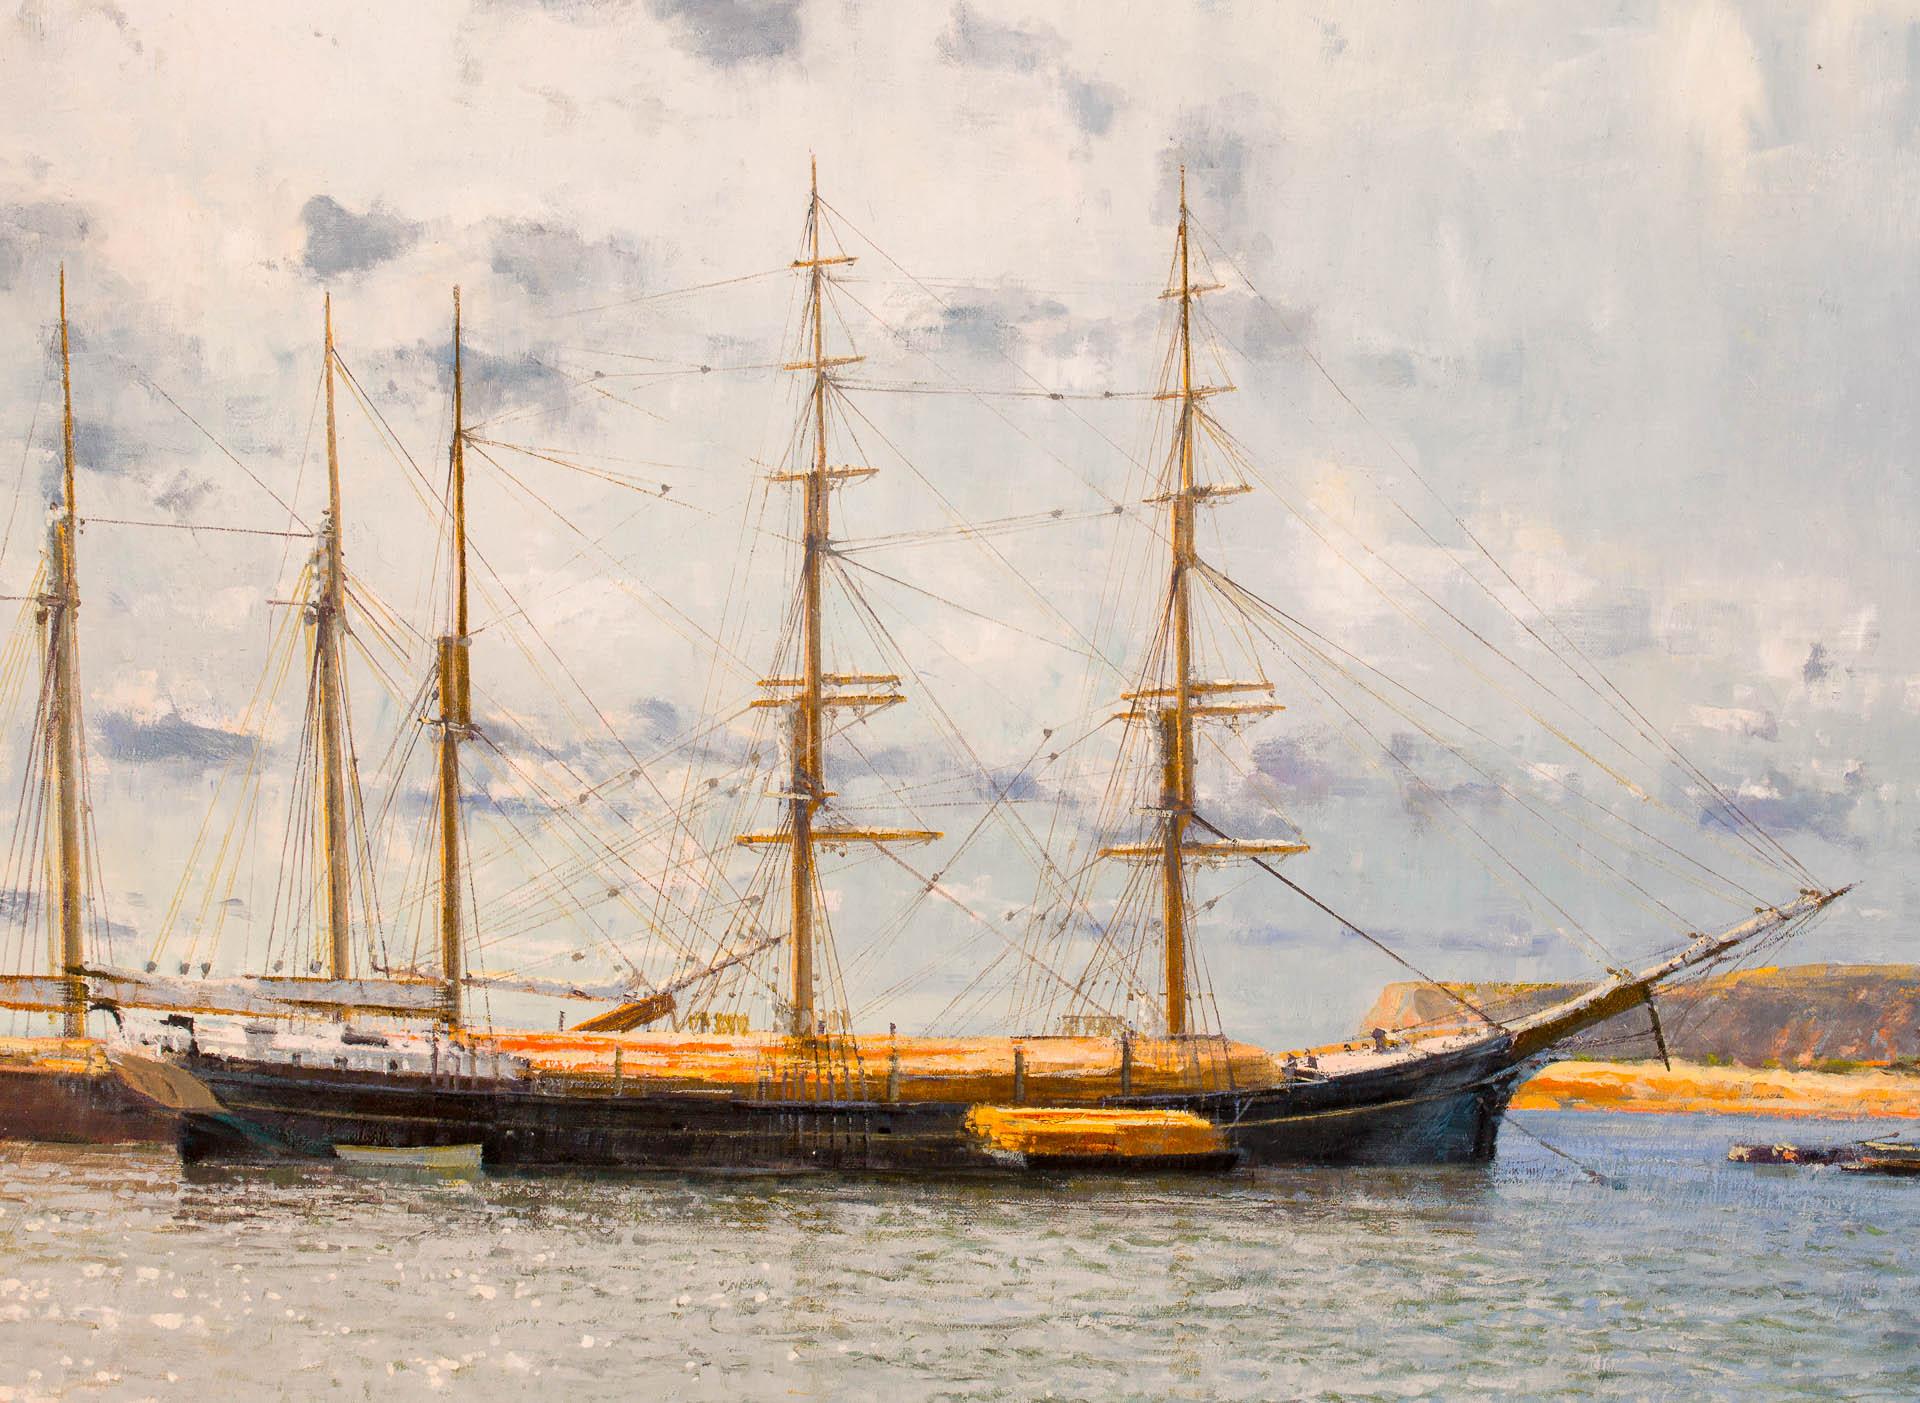 This bright and serene scene of ships unloading off San Diego, California features a ship with a less than quiet history. The painting shows a typically bright and sunny Southern California day, the deep blue waters of San Diego providing the